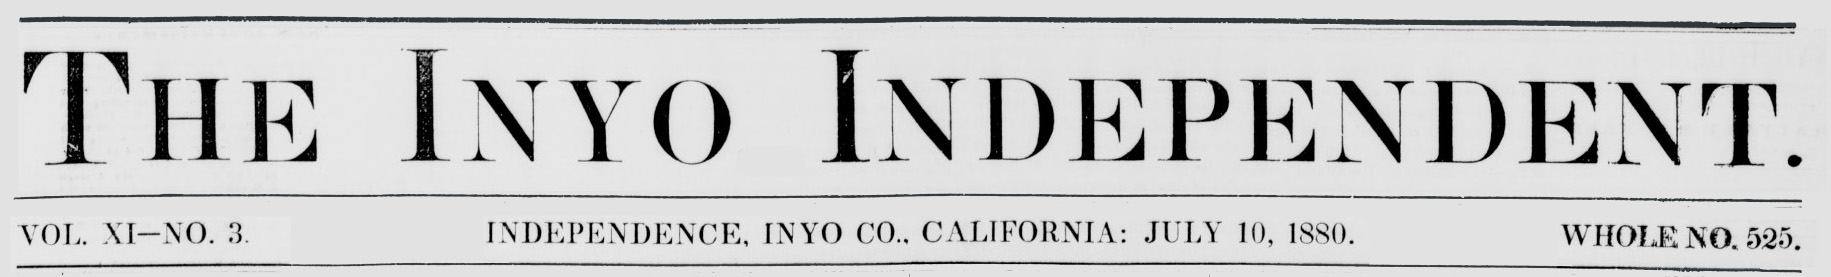 the inyo independent